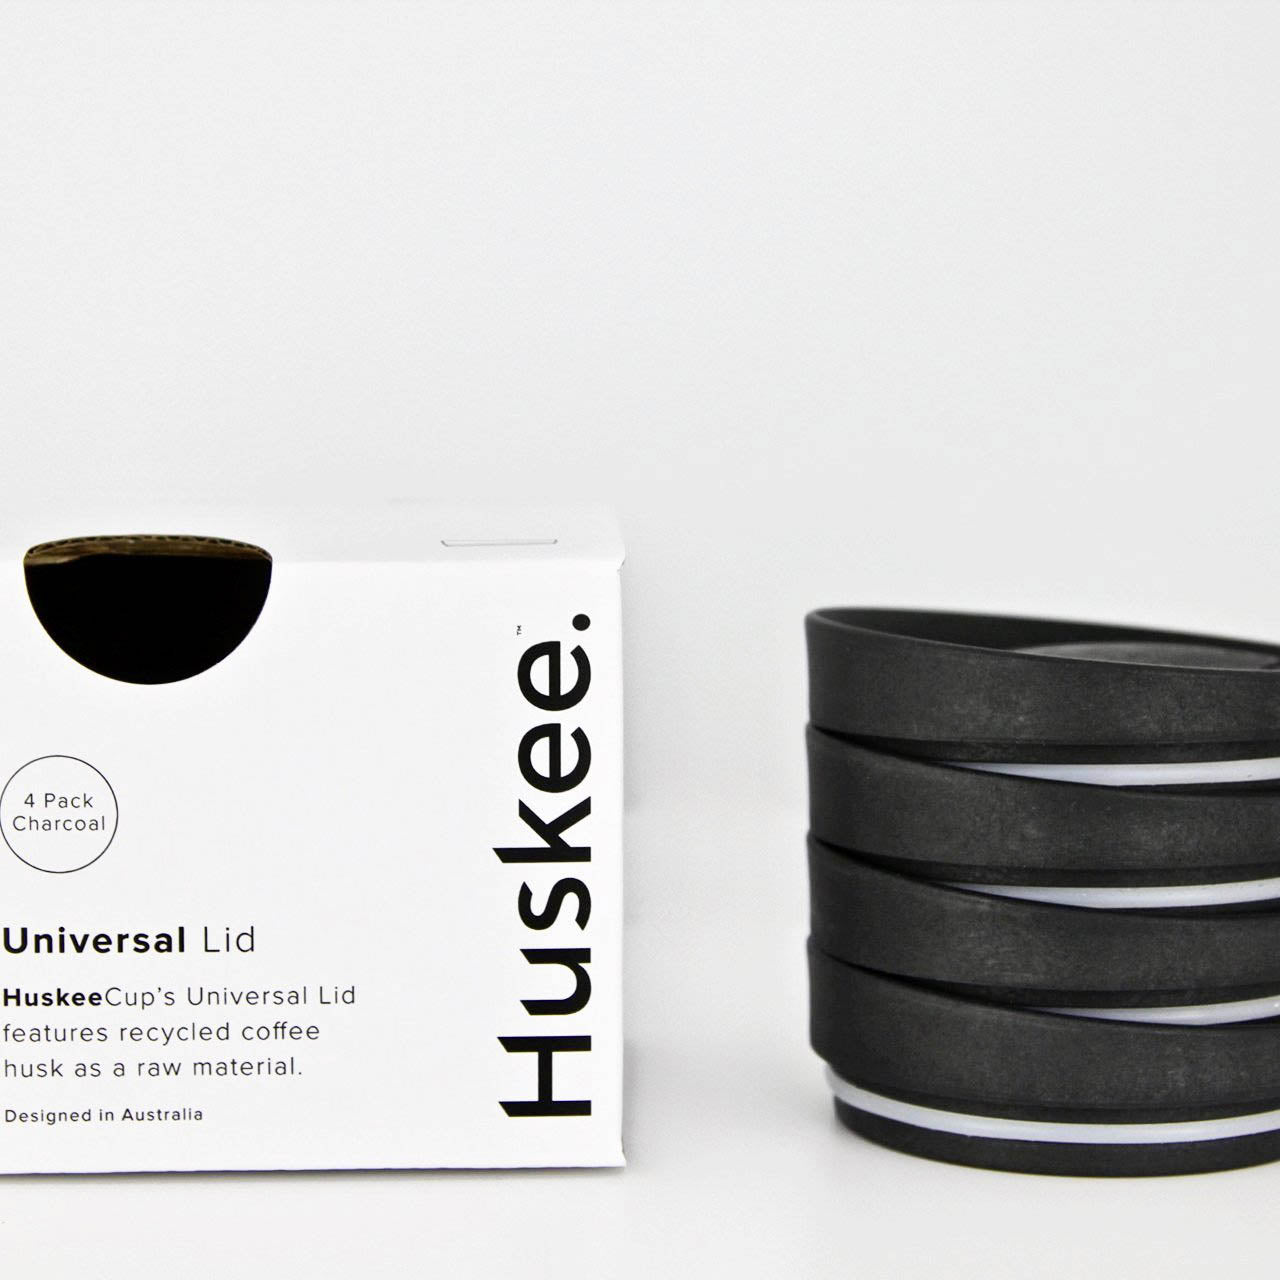 Huskee Coffee Universal Lid Pack of 4 (Charcoal/Natural)